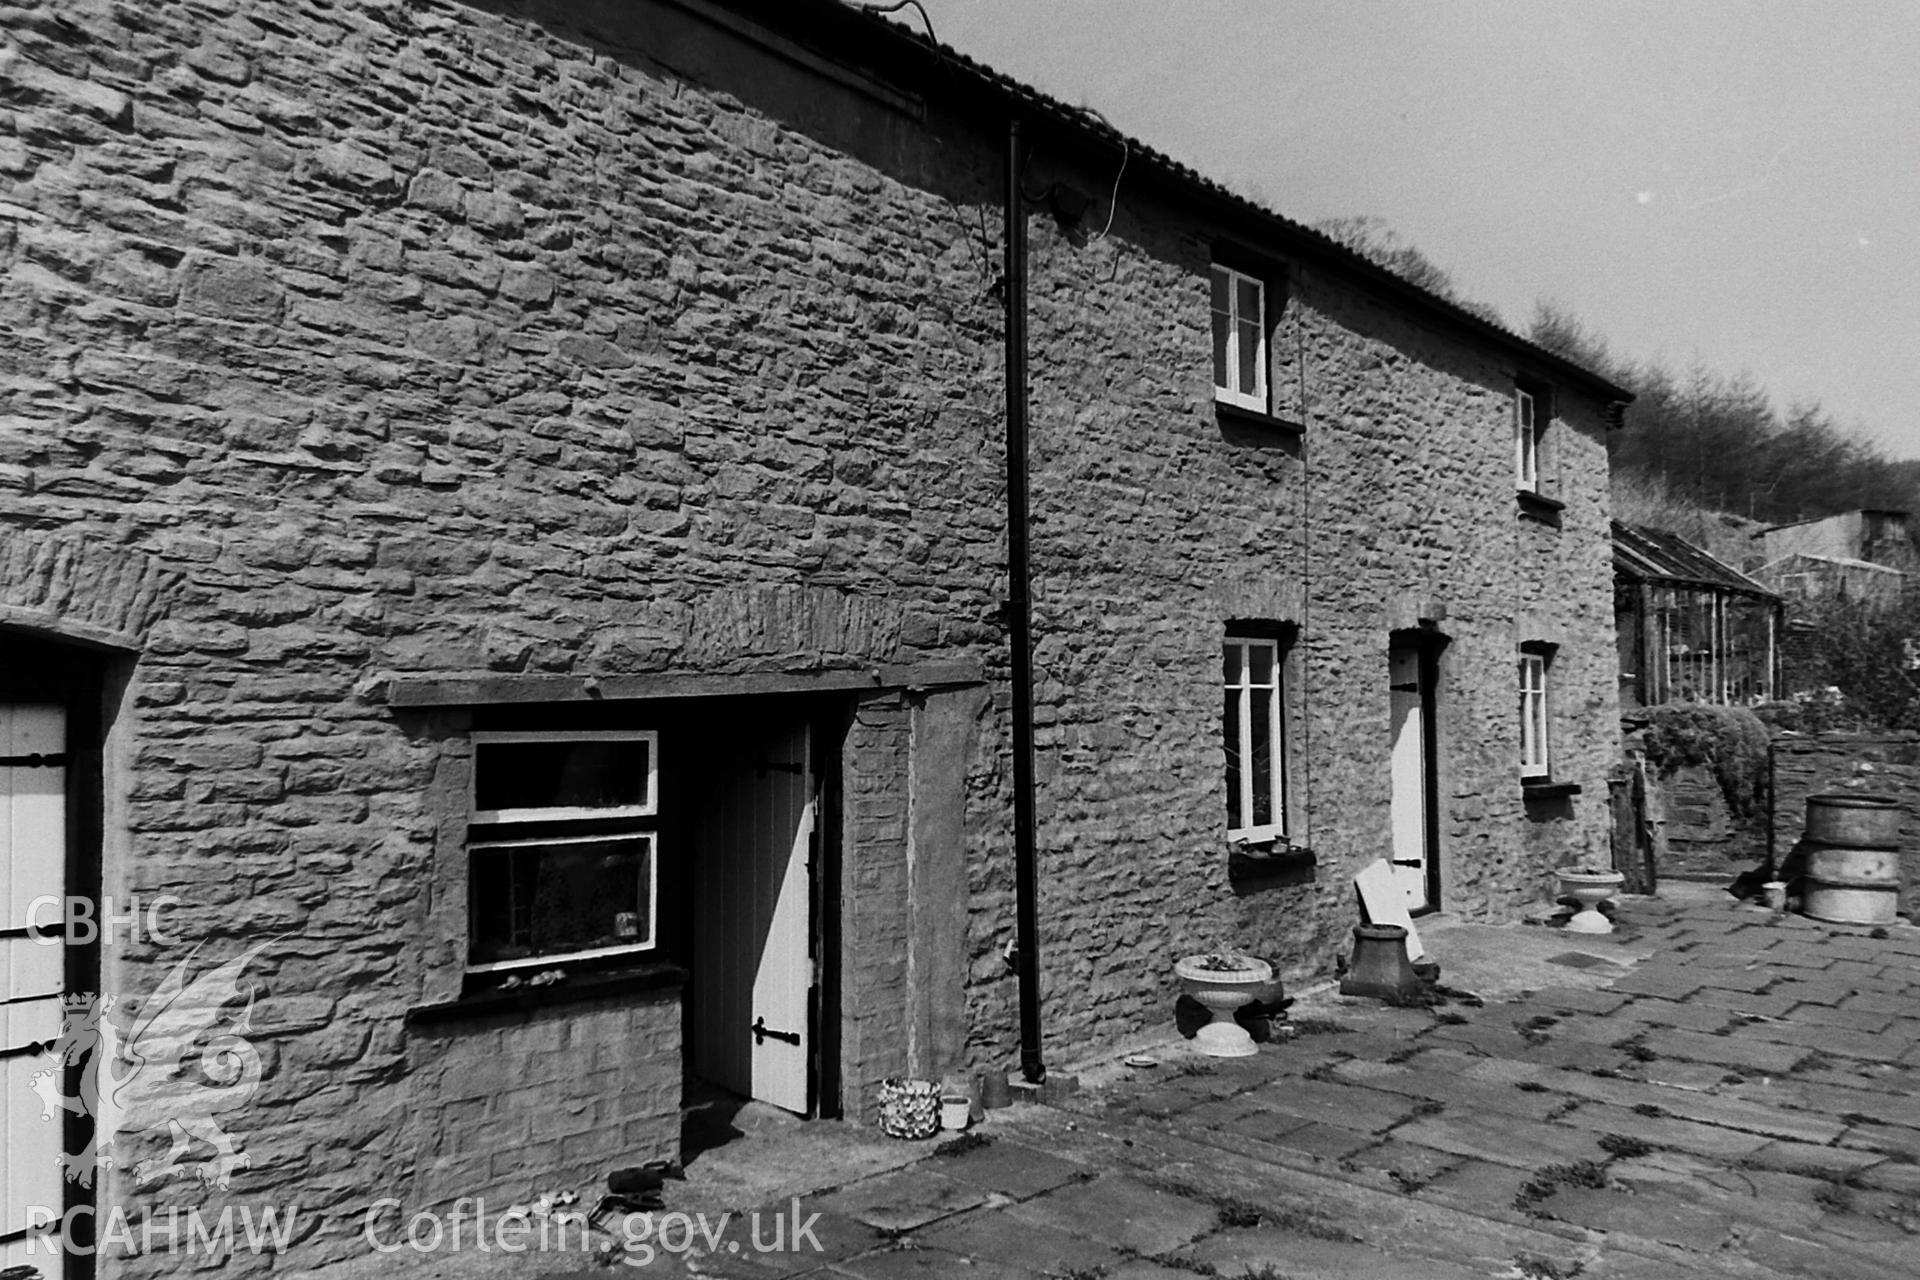 Black and white photo showing exterior view of Ffynnon Dwym, taken by Paul R. Davis, 1984.